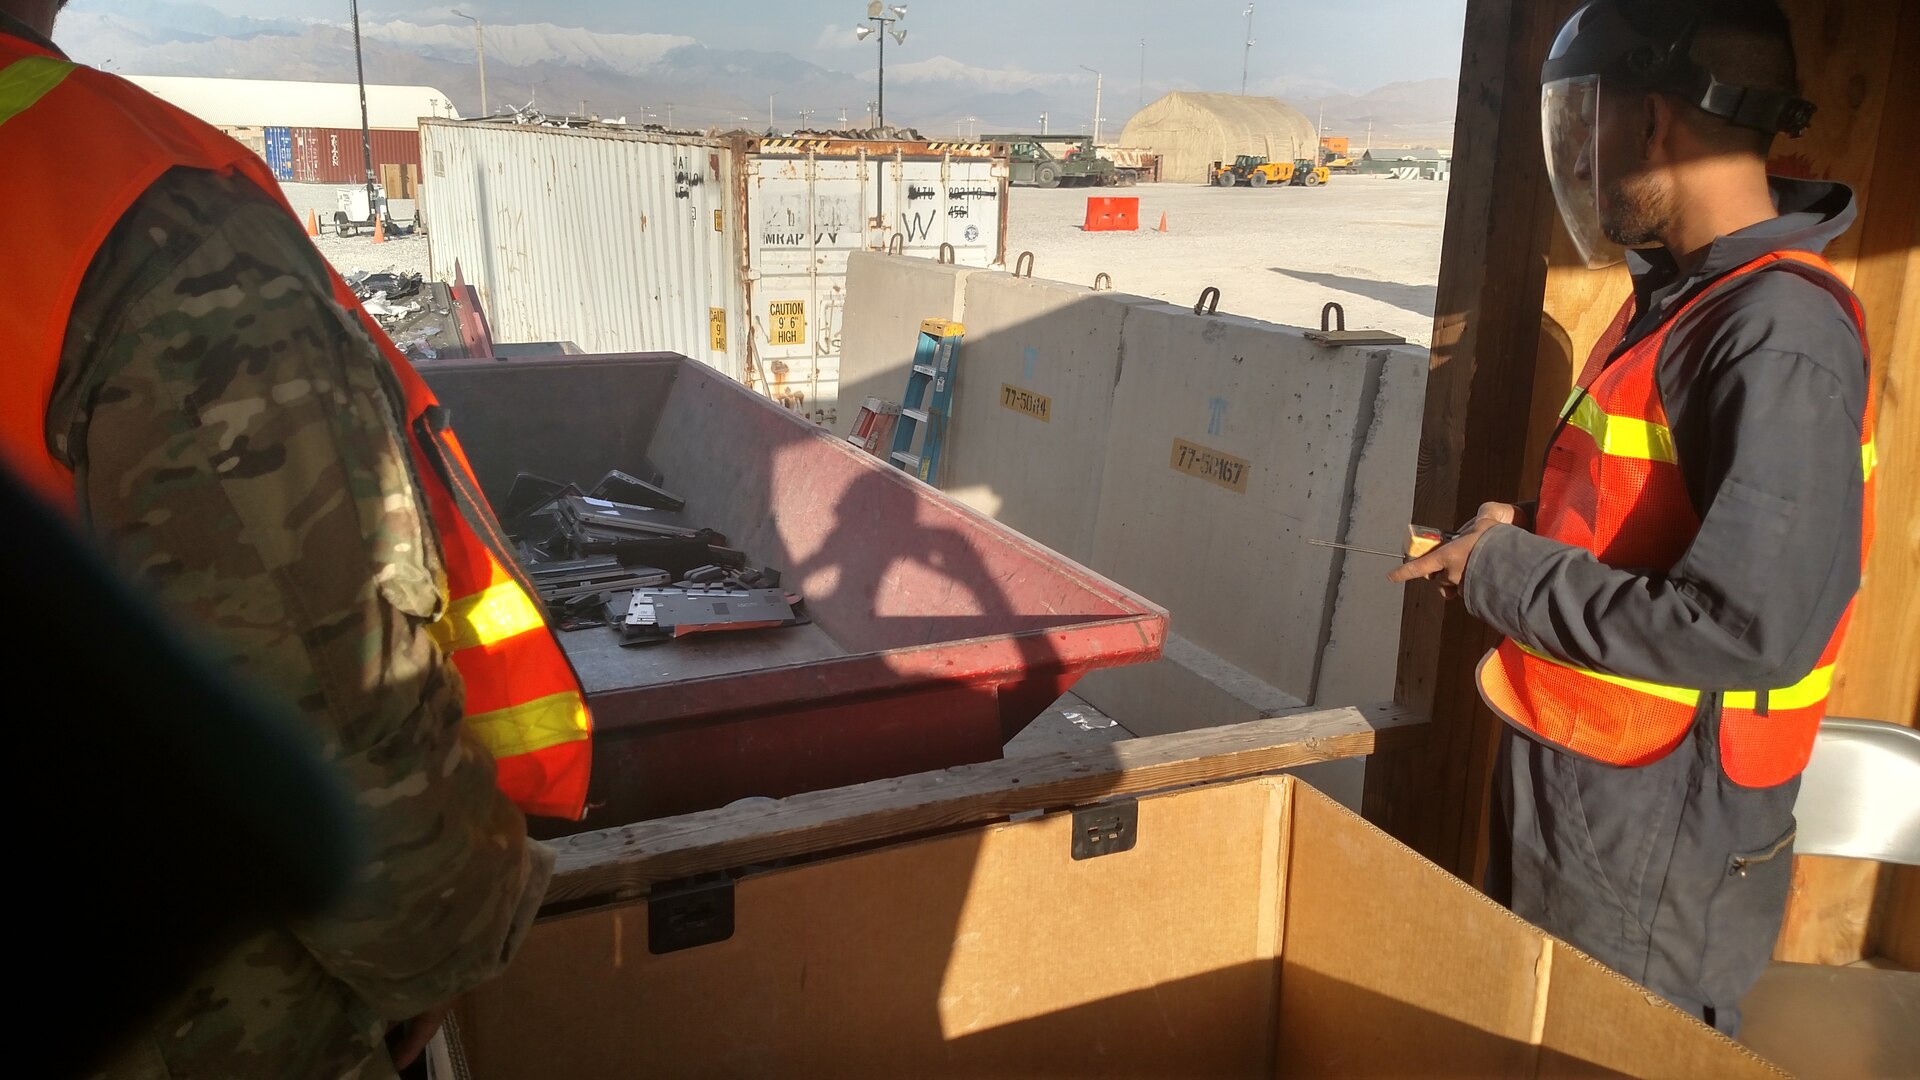 Property Disposal Specialist Antonio Acevedo (left), and a contractor employee use a trailer as a platform to safely load scrap material into a 7-foot shredder.